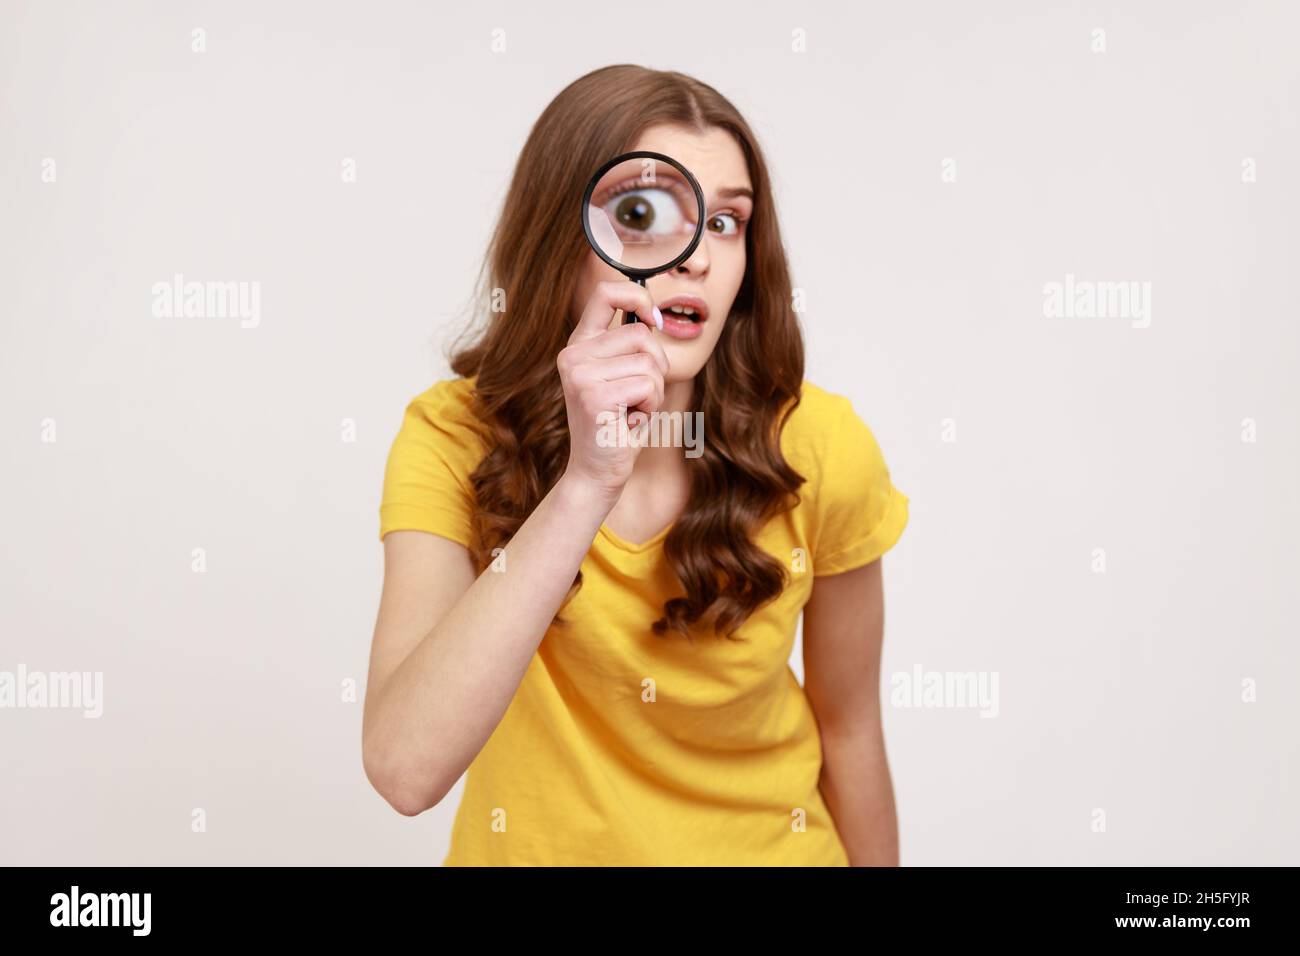 Portrait of funny young female in yellow casual T-shirt holding magnifying glass and looking at camera with big zoom eye, curious face. Indoor studio shot isolated on gray background. Stock Photo